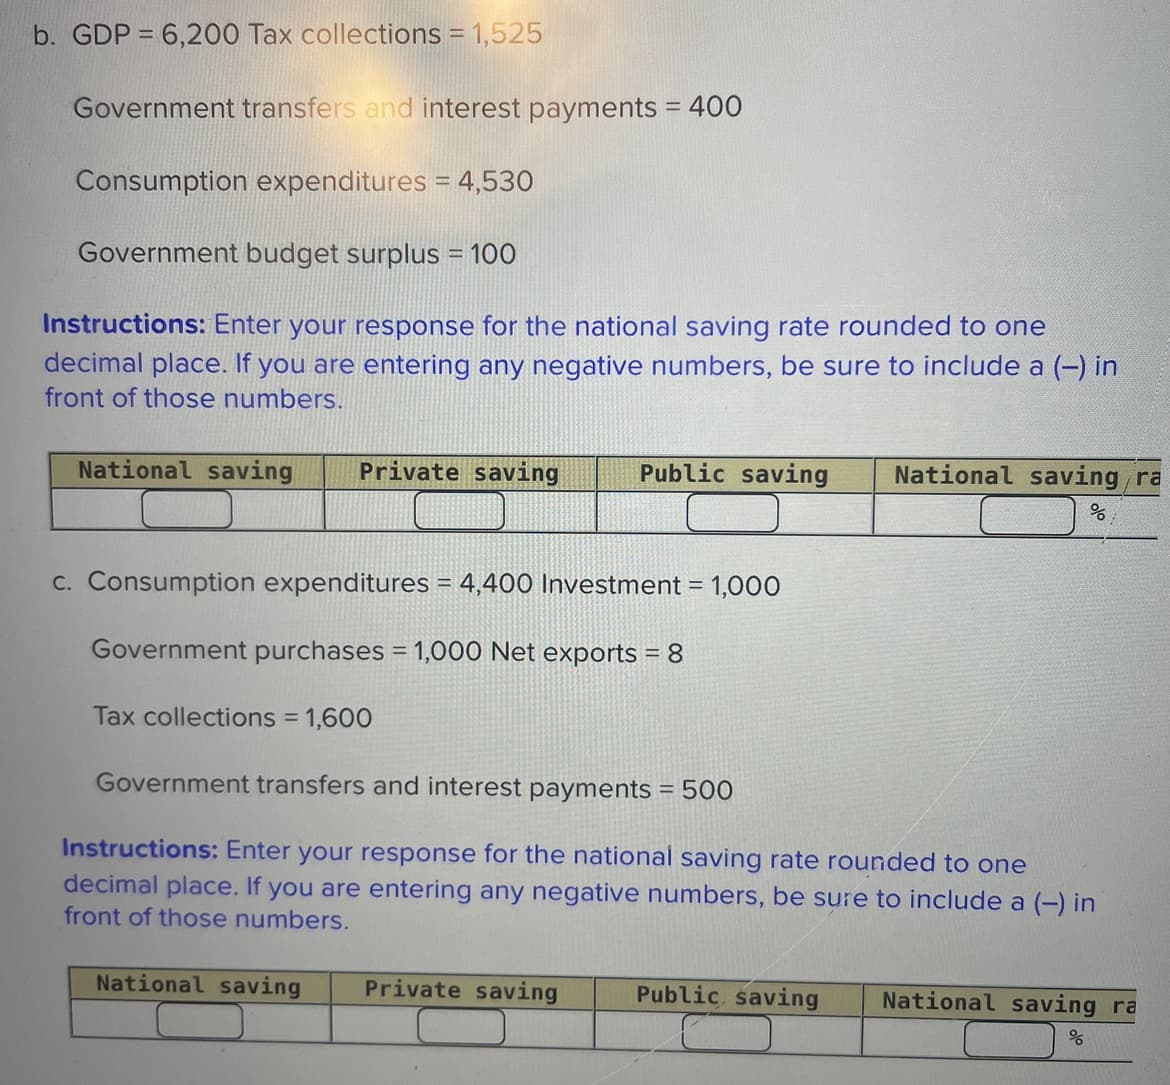 b. GDP = 6,200 Tax collections = 1,525
Government transfers and interest payments = 400
Consumption expenditures = 4,530
Government budget surplus = 100
Instructions: Enter your response for the national saving rate rounded to one
decimal place. If you are entering any negative numbers, be sure to include a (-) in
front of those numbers.
National saving Private saving
Public saving
National saving/ra
%
c. Consumption expenditures = 4,400 Investment = 1,000
Government purchases = 1,000 Net exports = 8
Tax collections = 1,600
Government transfers and interest payments = 500
Instructions: Enter your response for the national saving rate rounded to one
decimal place. If you are entering any negative numbers, be sure to include a (-) in
front of those numbers.
National saving
Private saving
Public saving
National saving ra
응